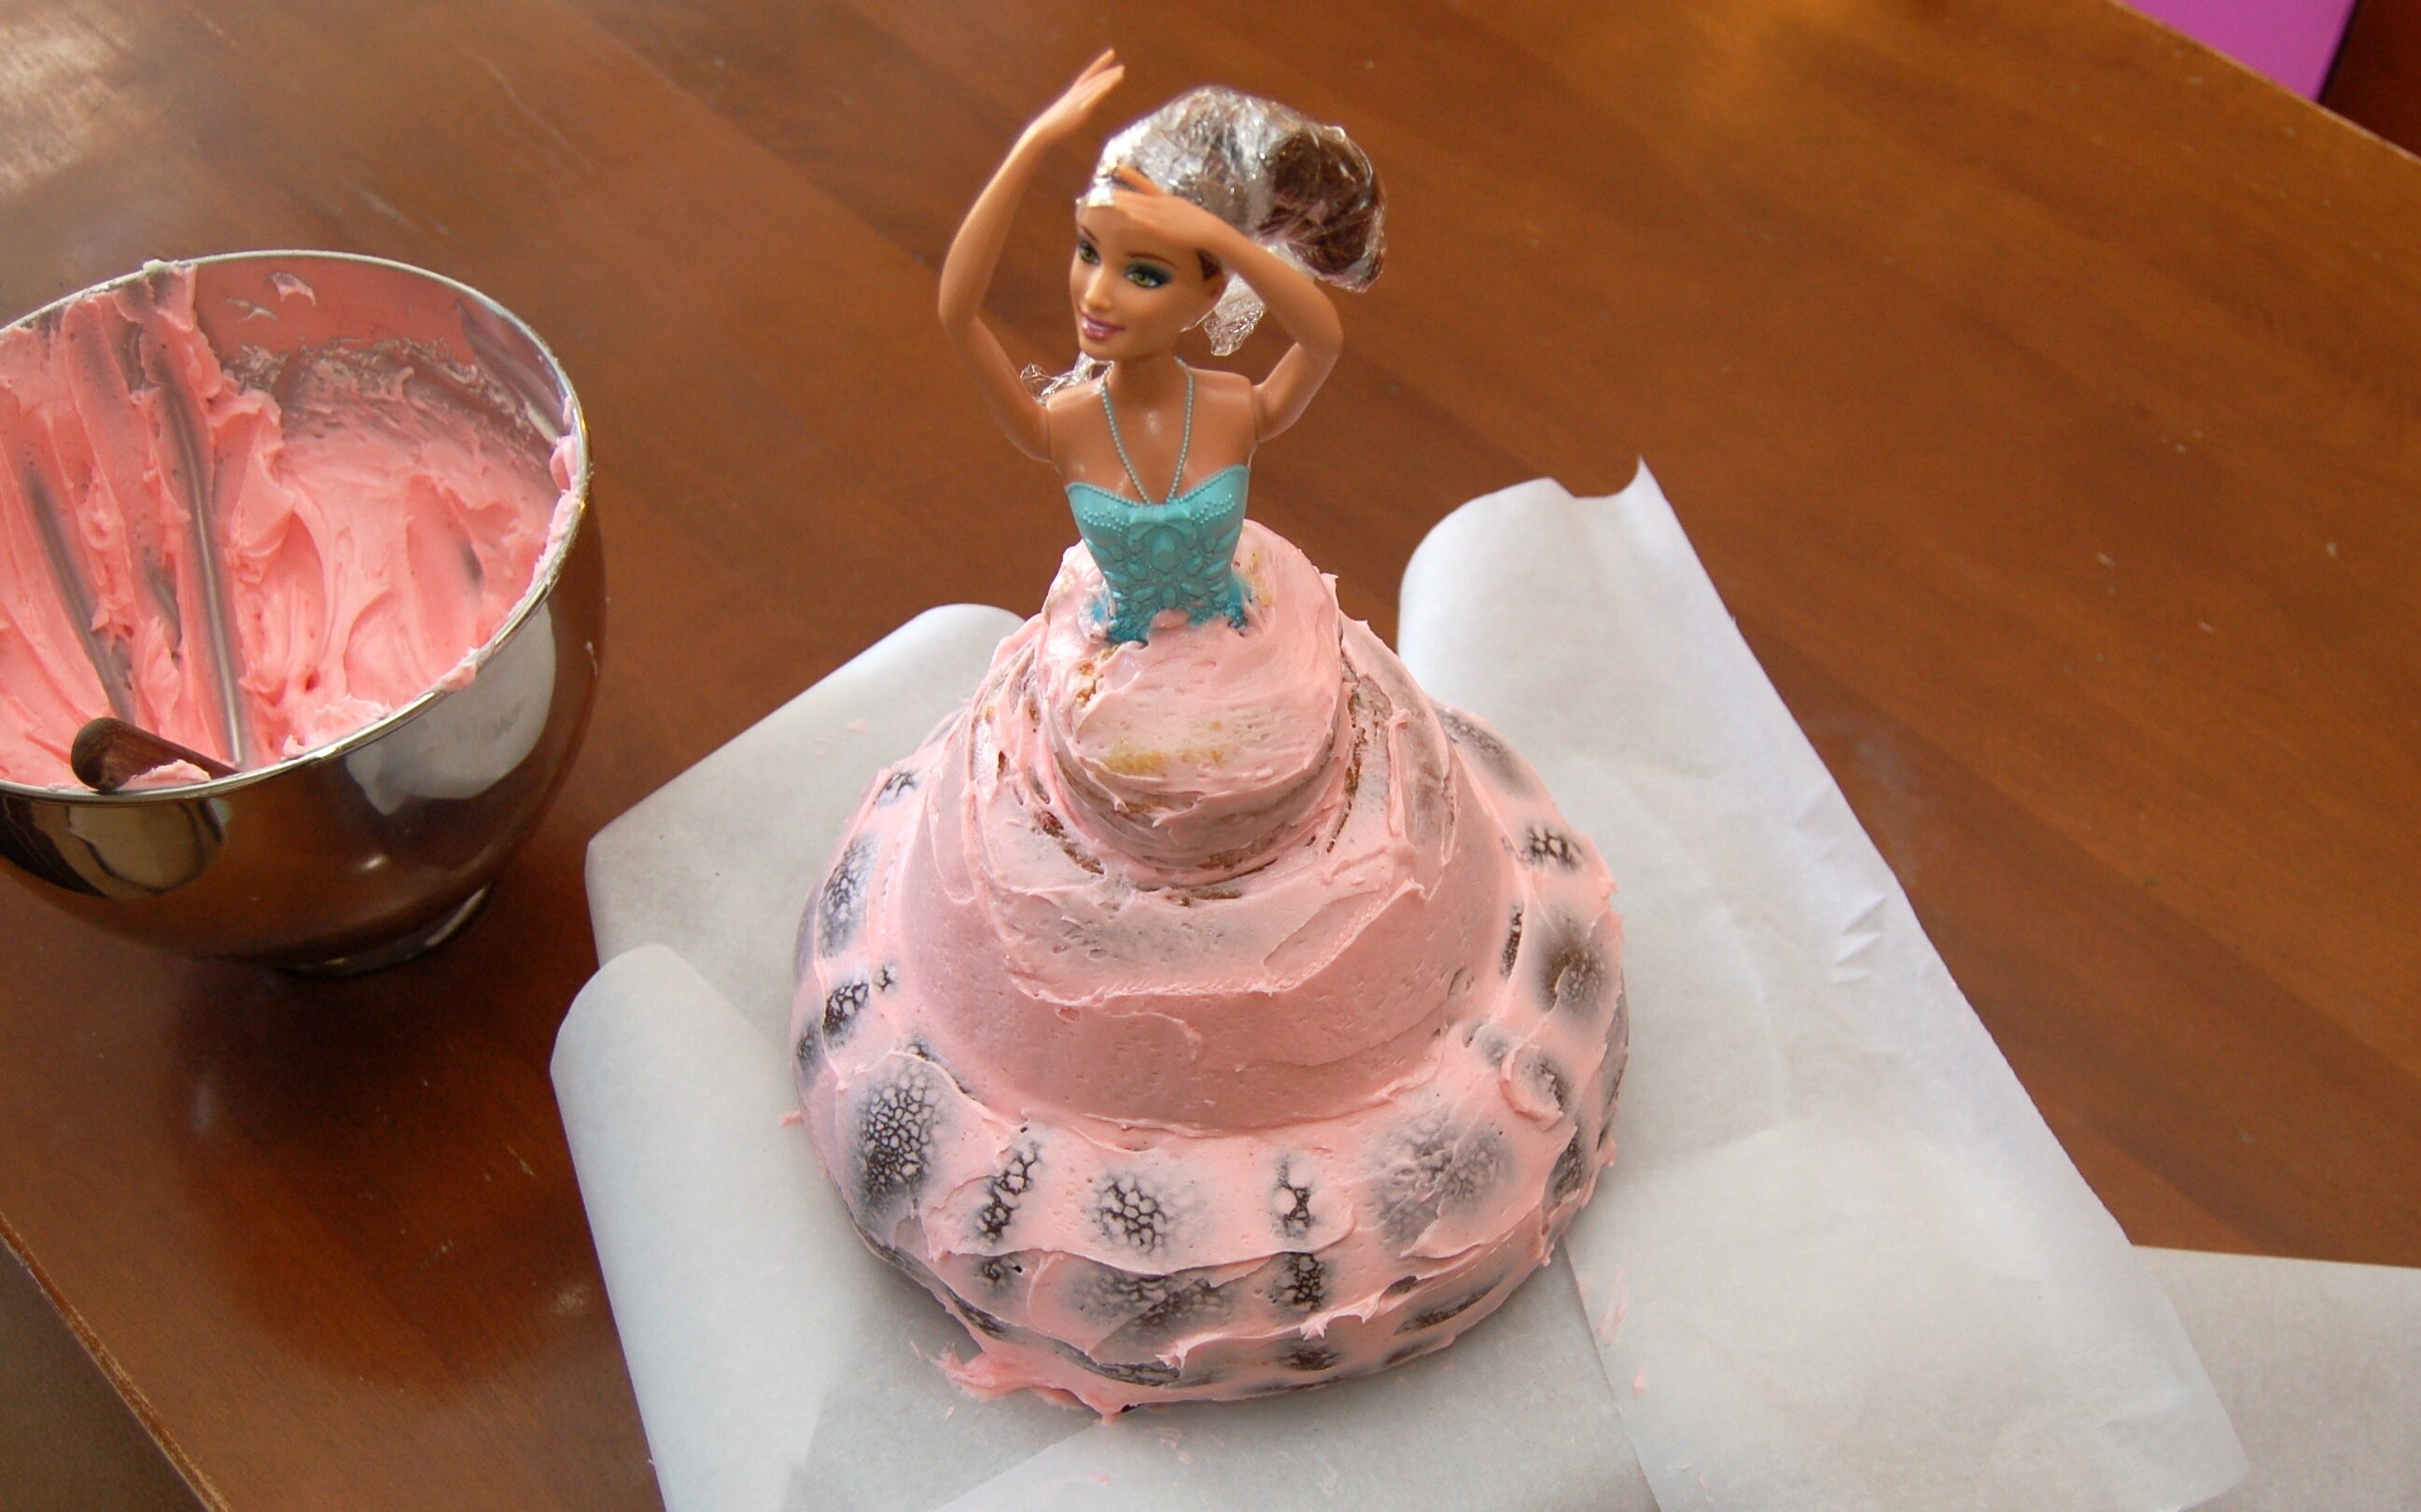 Making Memories with a Barbie Cake: How to Create a Delicious and Fun